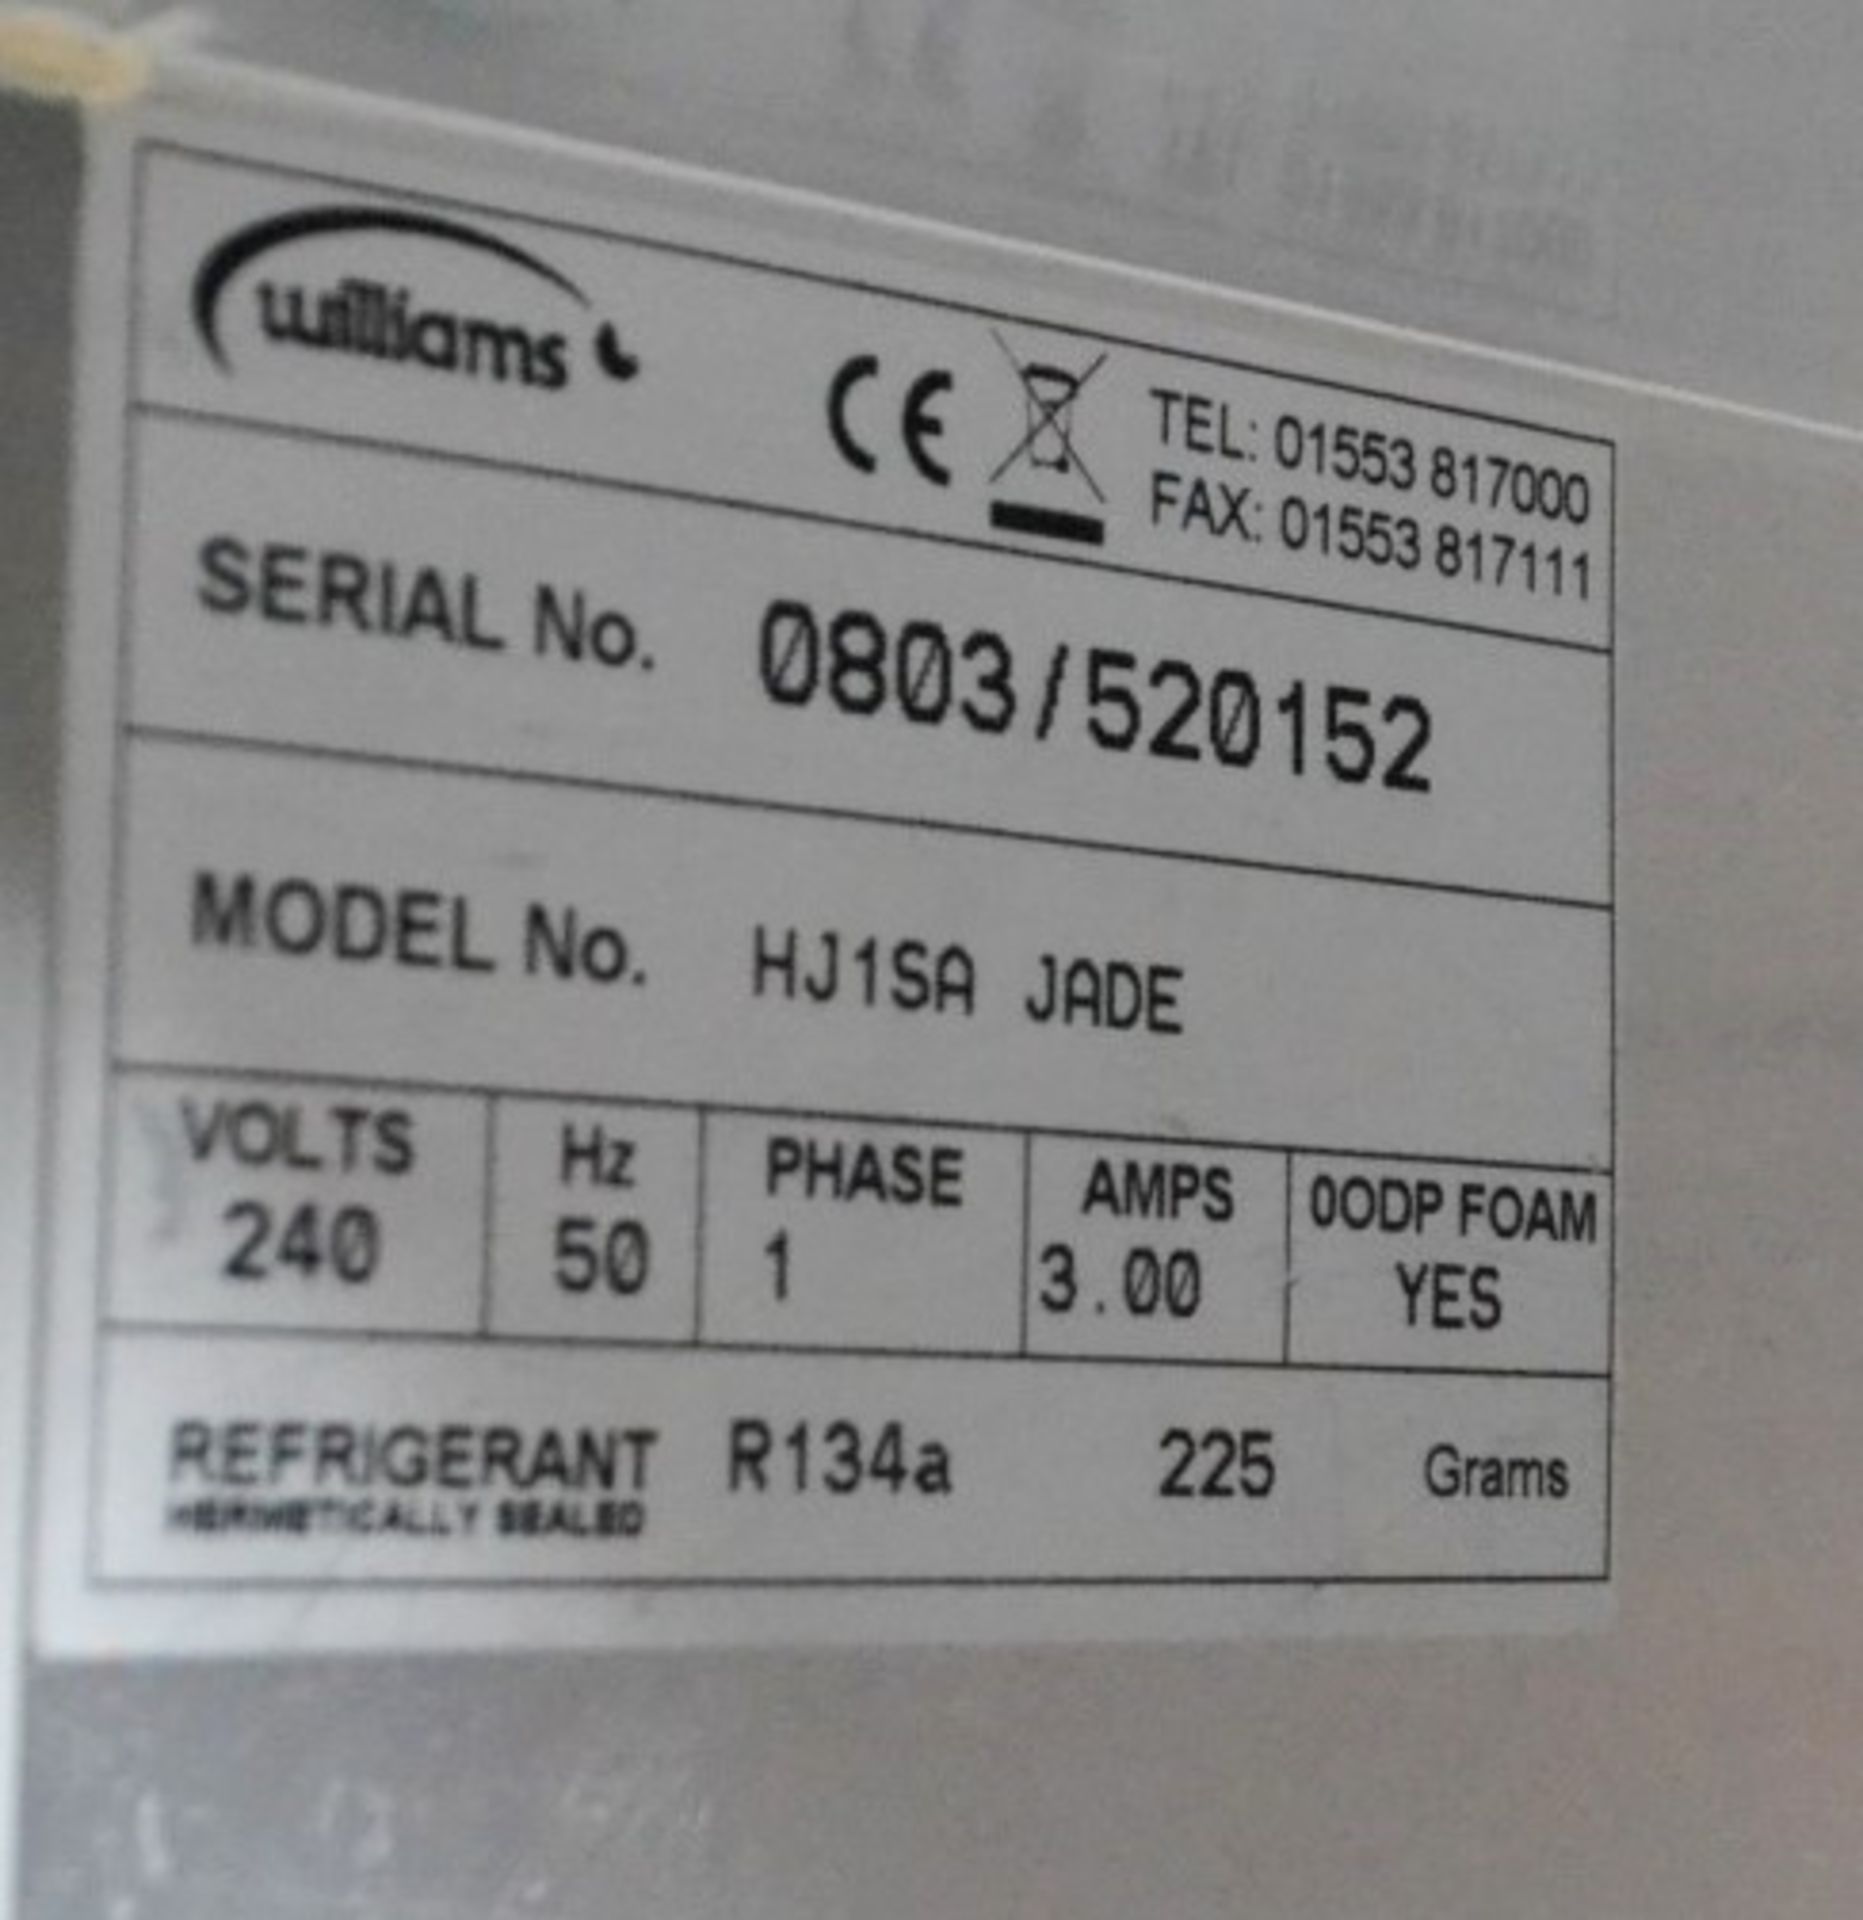 1 x Williams Jade 1-Door 620Ltr Commercial Cabinet Fridge (HJ1SA JADE) - Tall Upright Stainless - Image 3 of 14